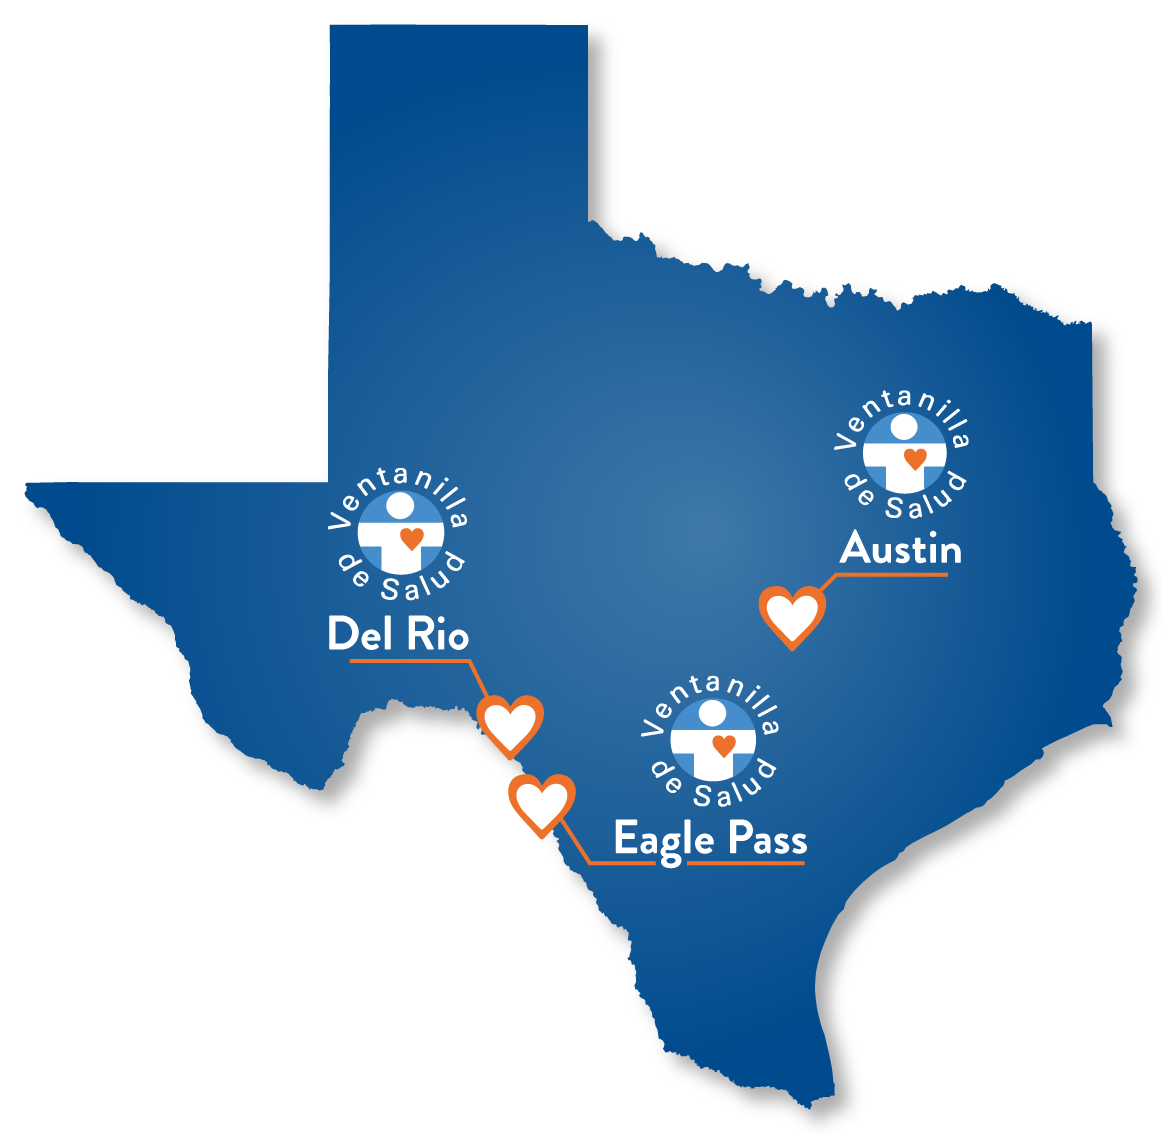 VdS office locations in Texas